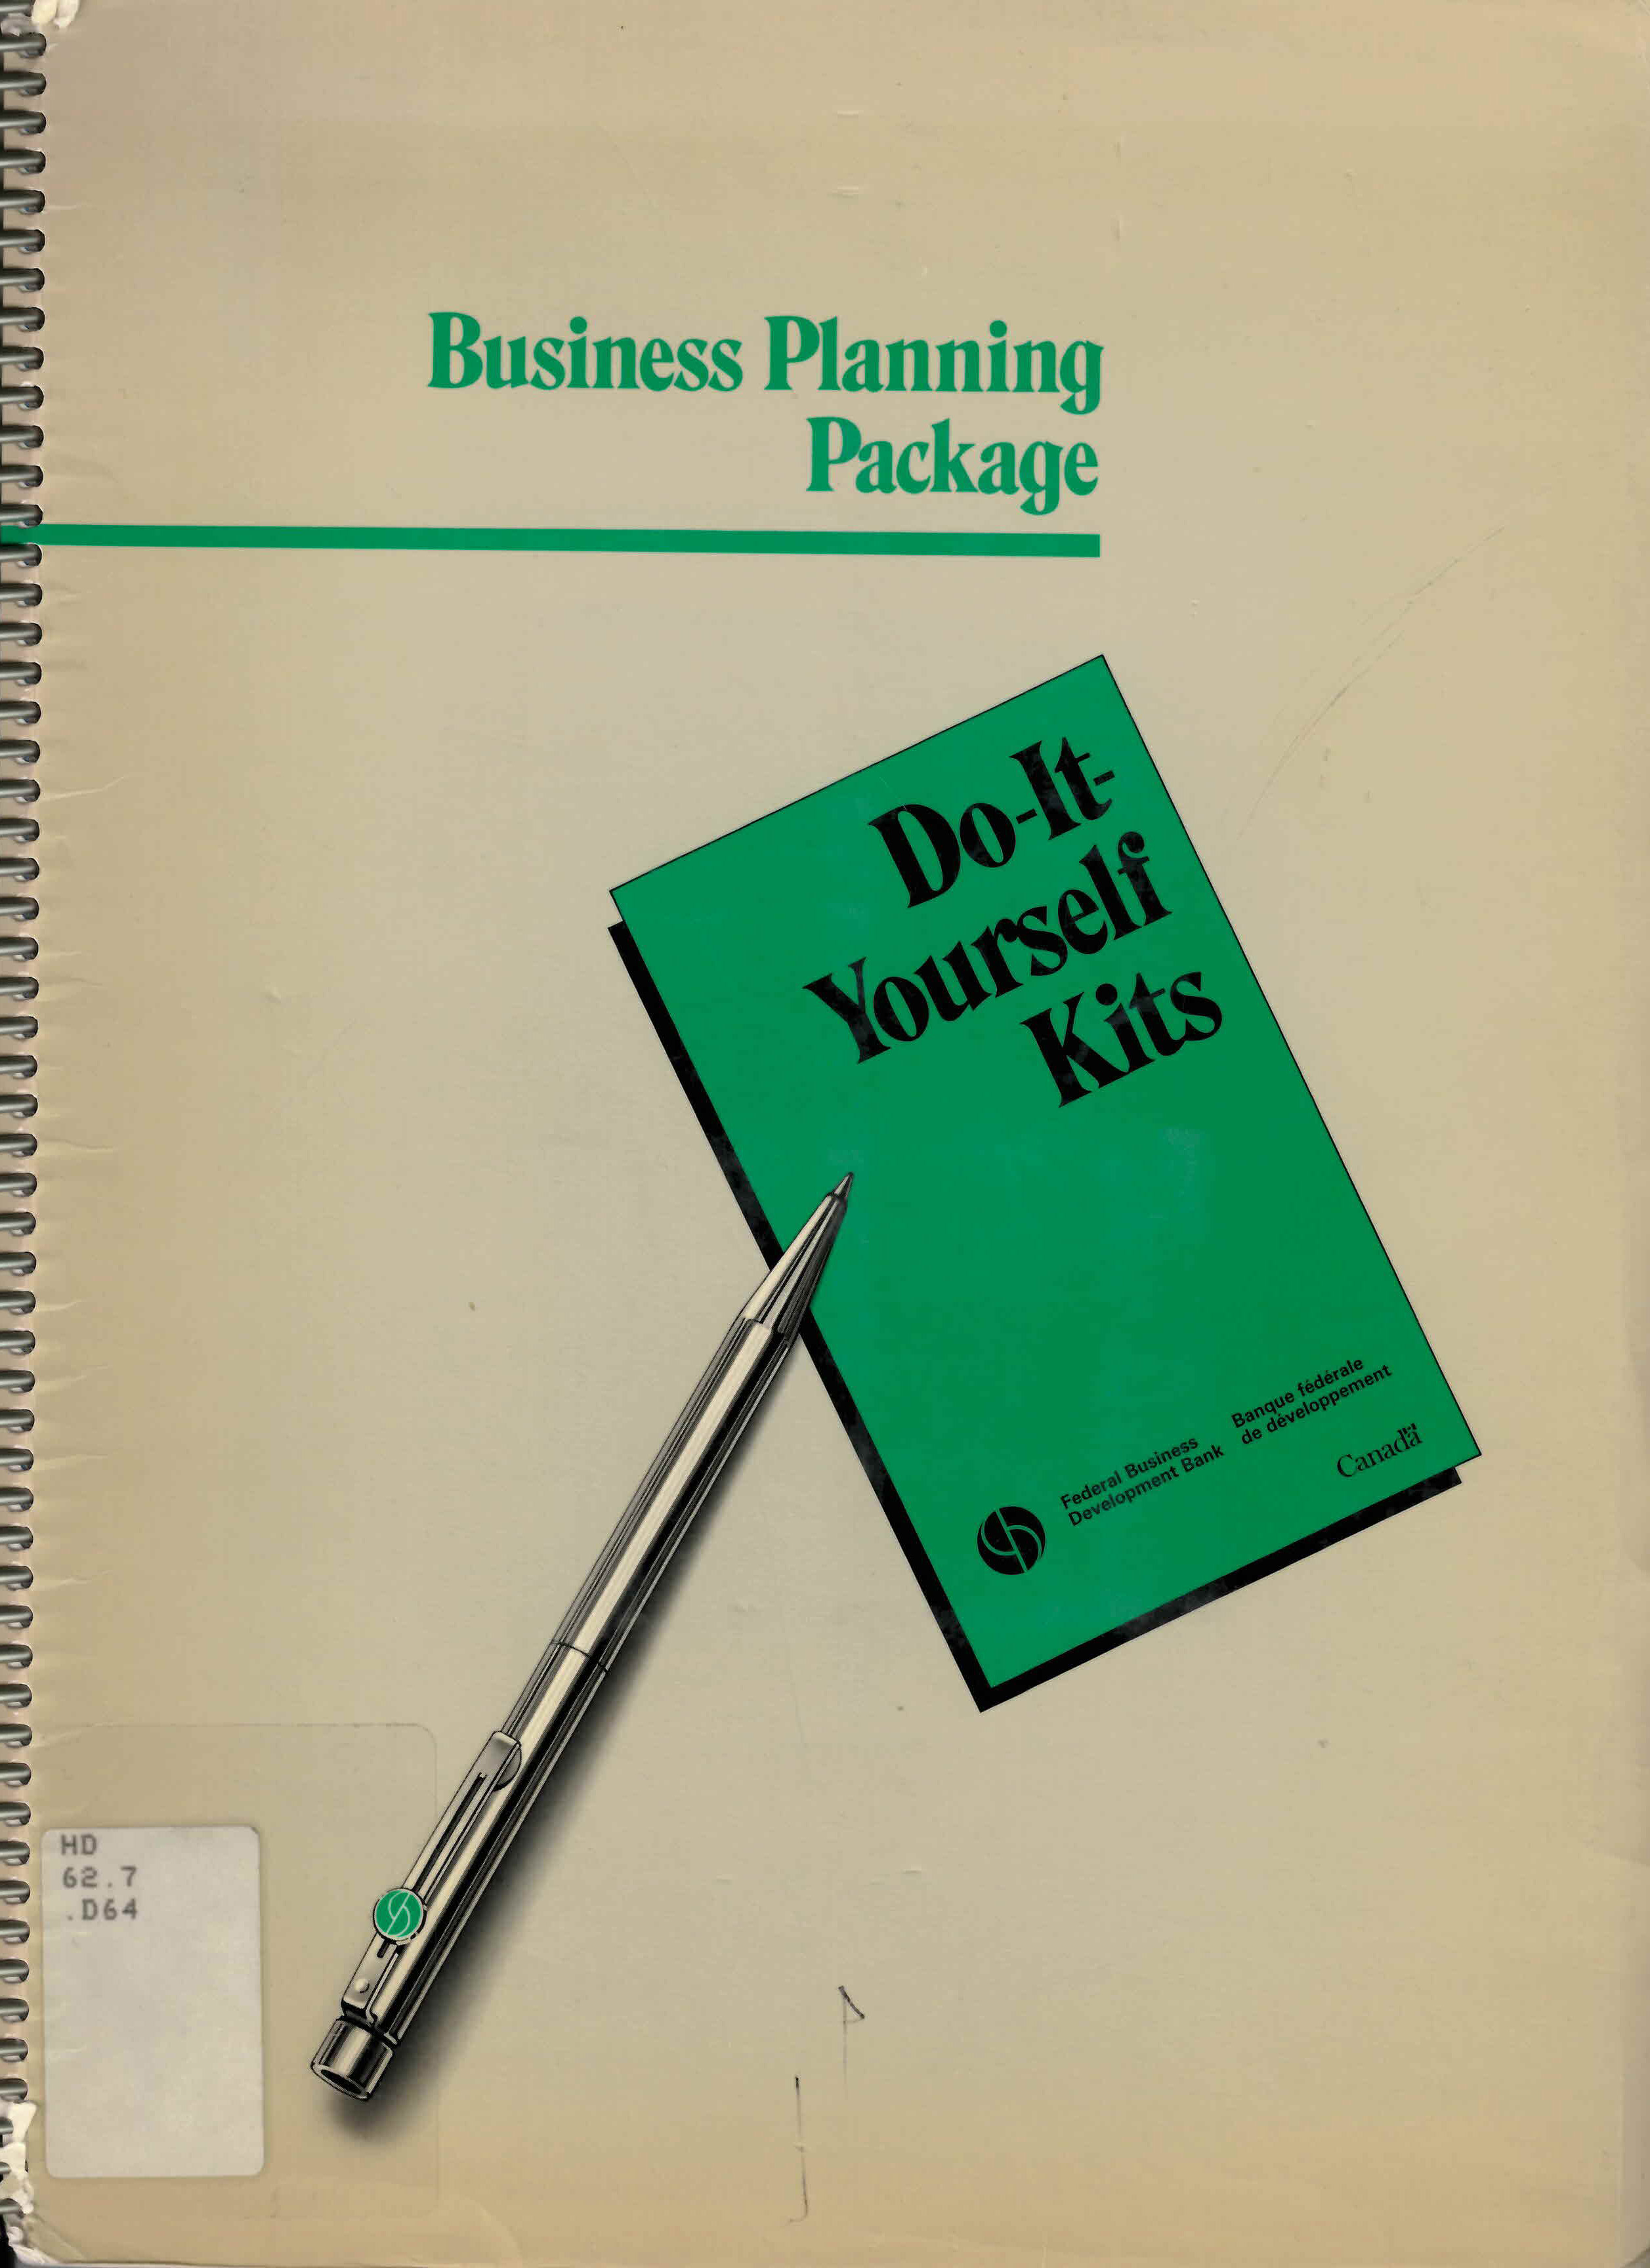 Do it yourself business planning package